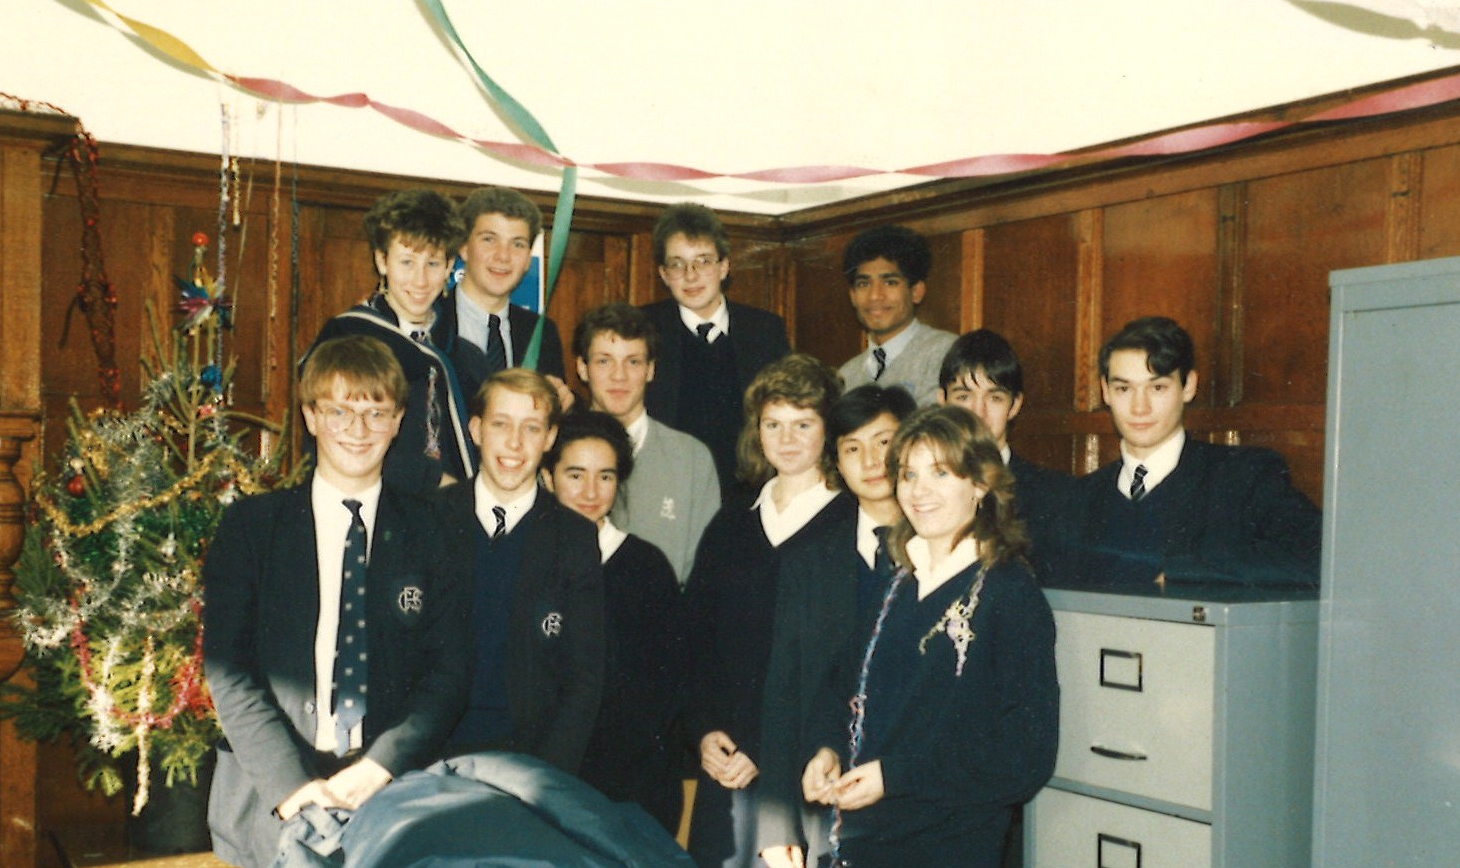 A bit early for Xmas so ignore the tree! a class or form RGS sixth form photo in Broadfield??